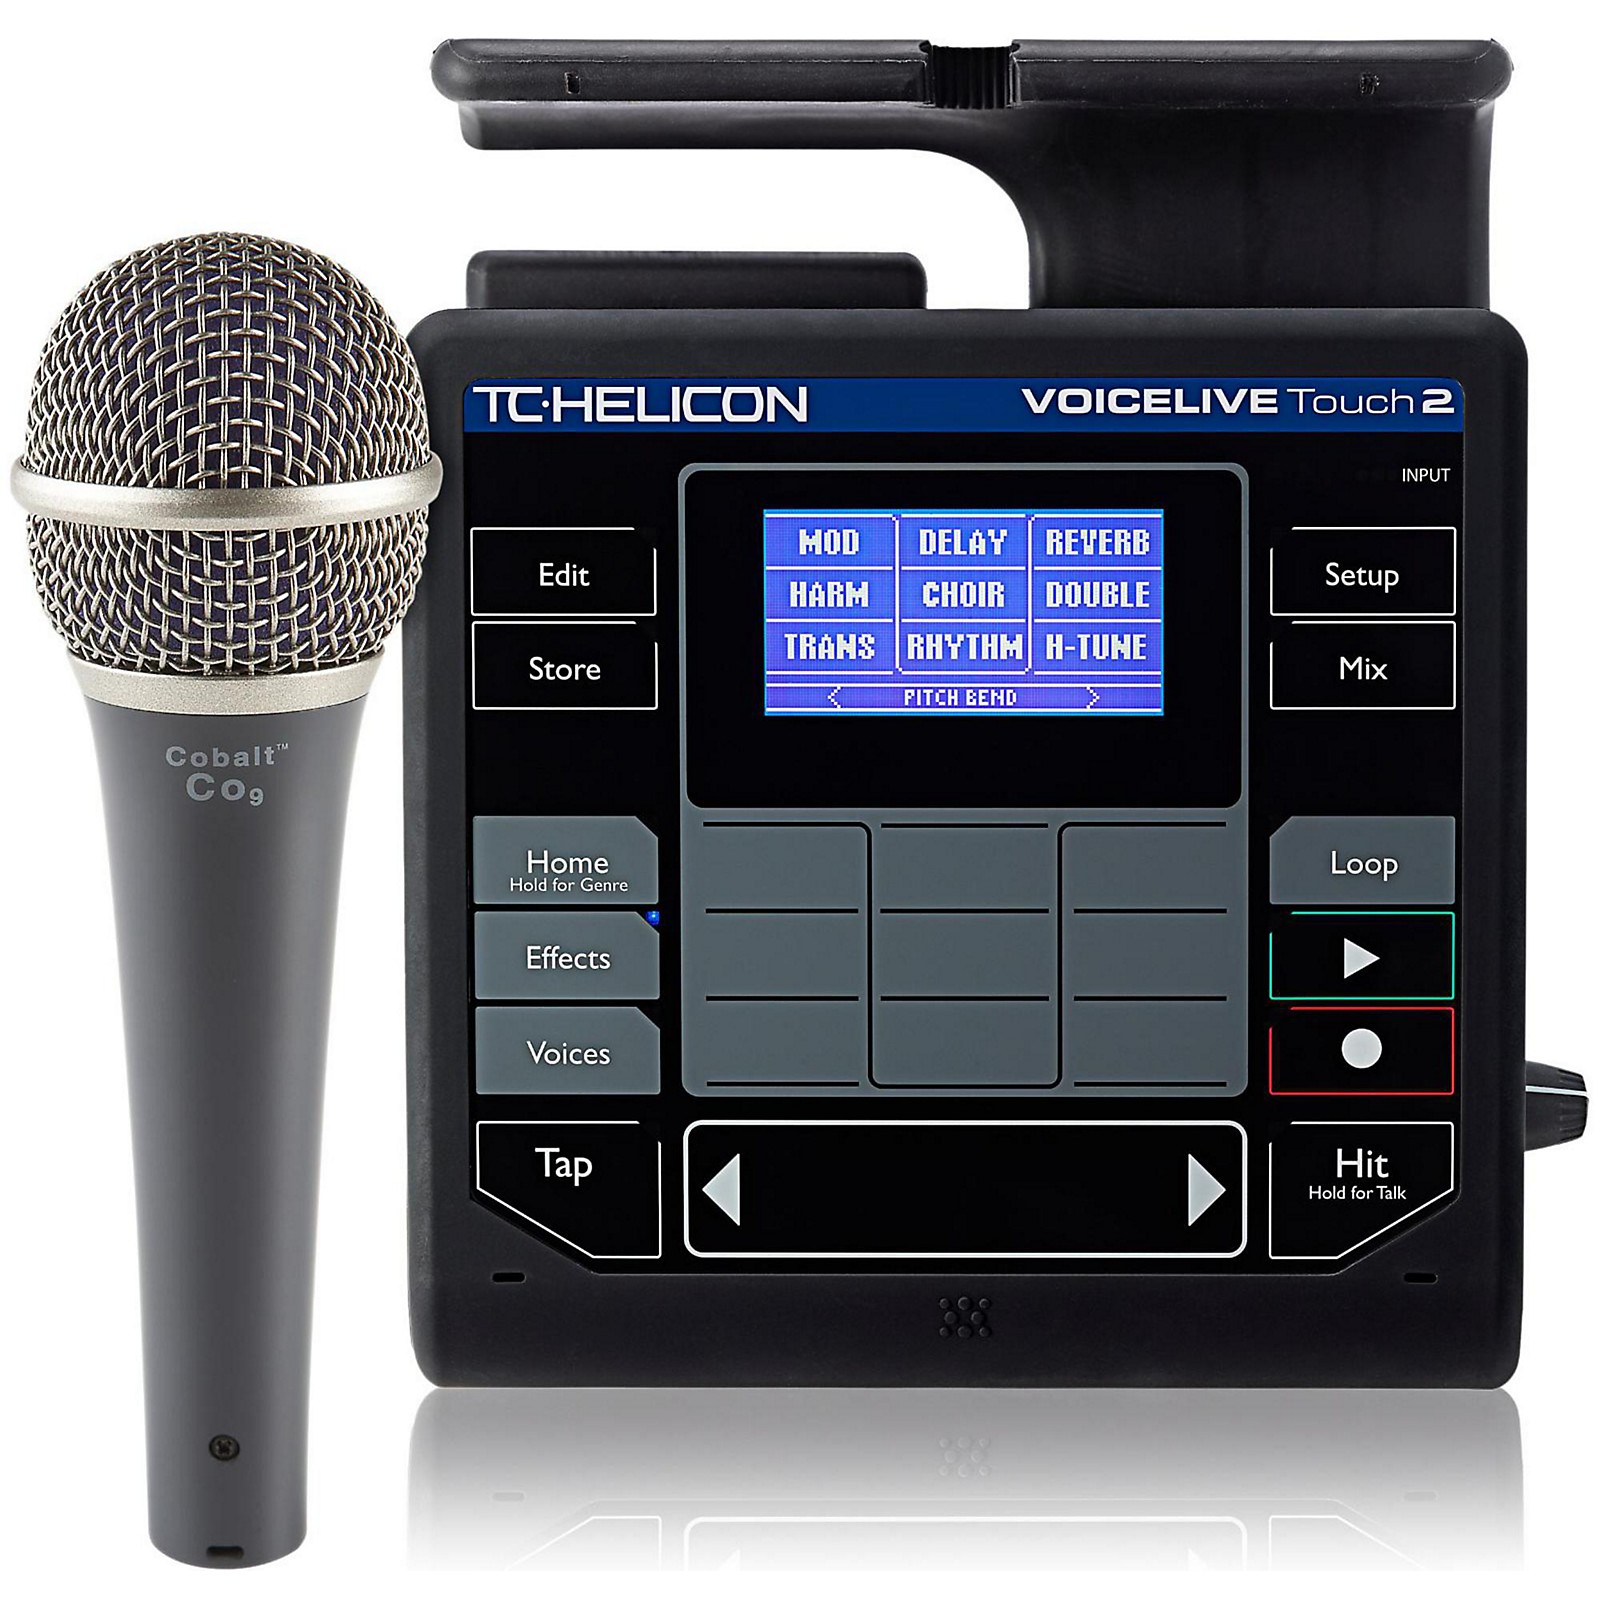 TC-Helicon VoiceLive Touch 2 with Cobalt CO9 Mic Bundle | Guitar 